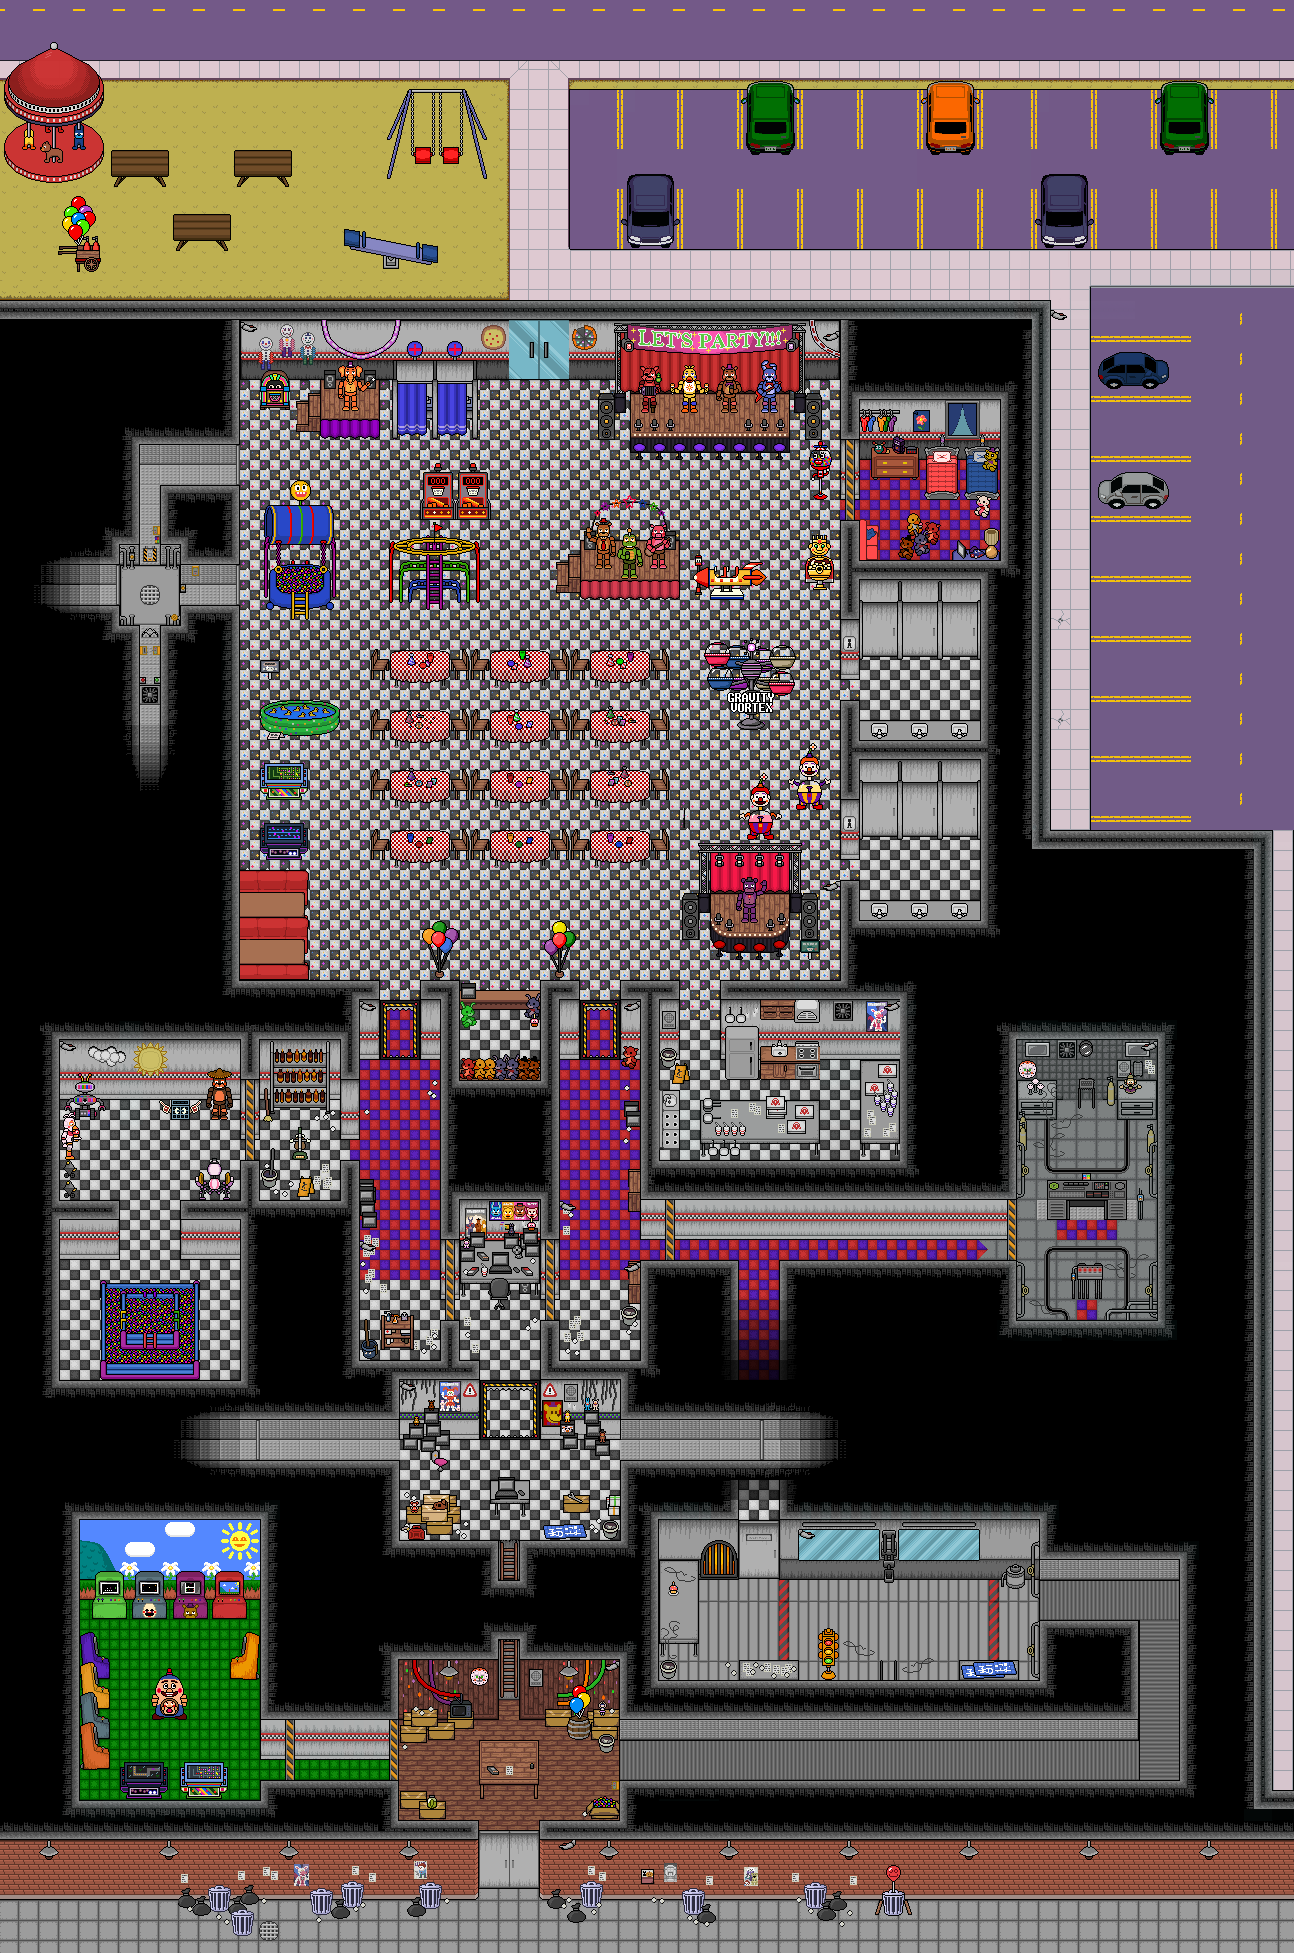 Fnaf 1 map redesign inspired by real pizza places from the 80s. :  r/fivenightsatfreddys